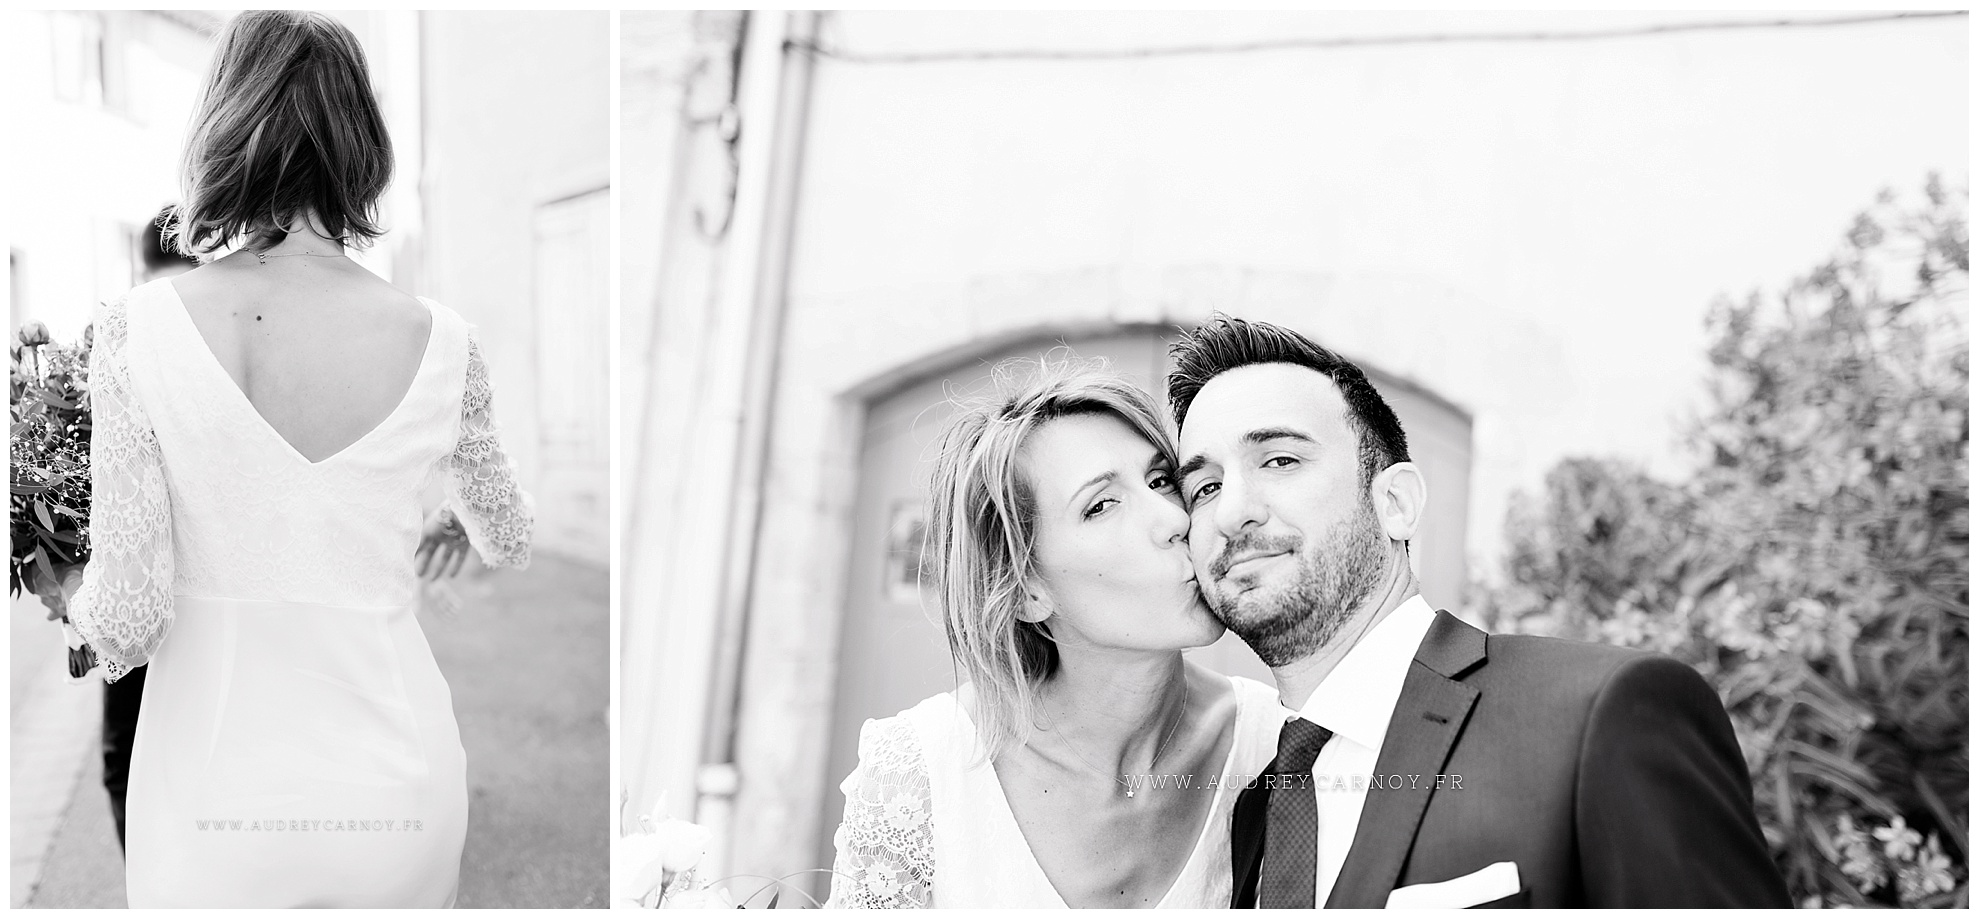 Mariage Pertuis | Laurence & Anthony 12